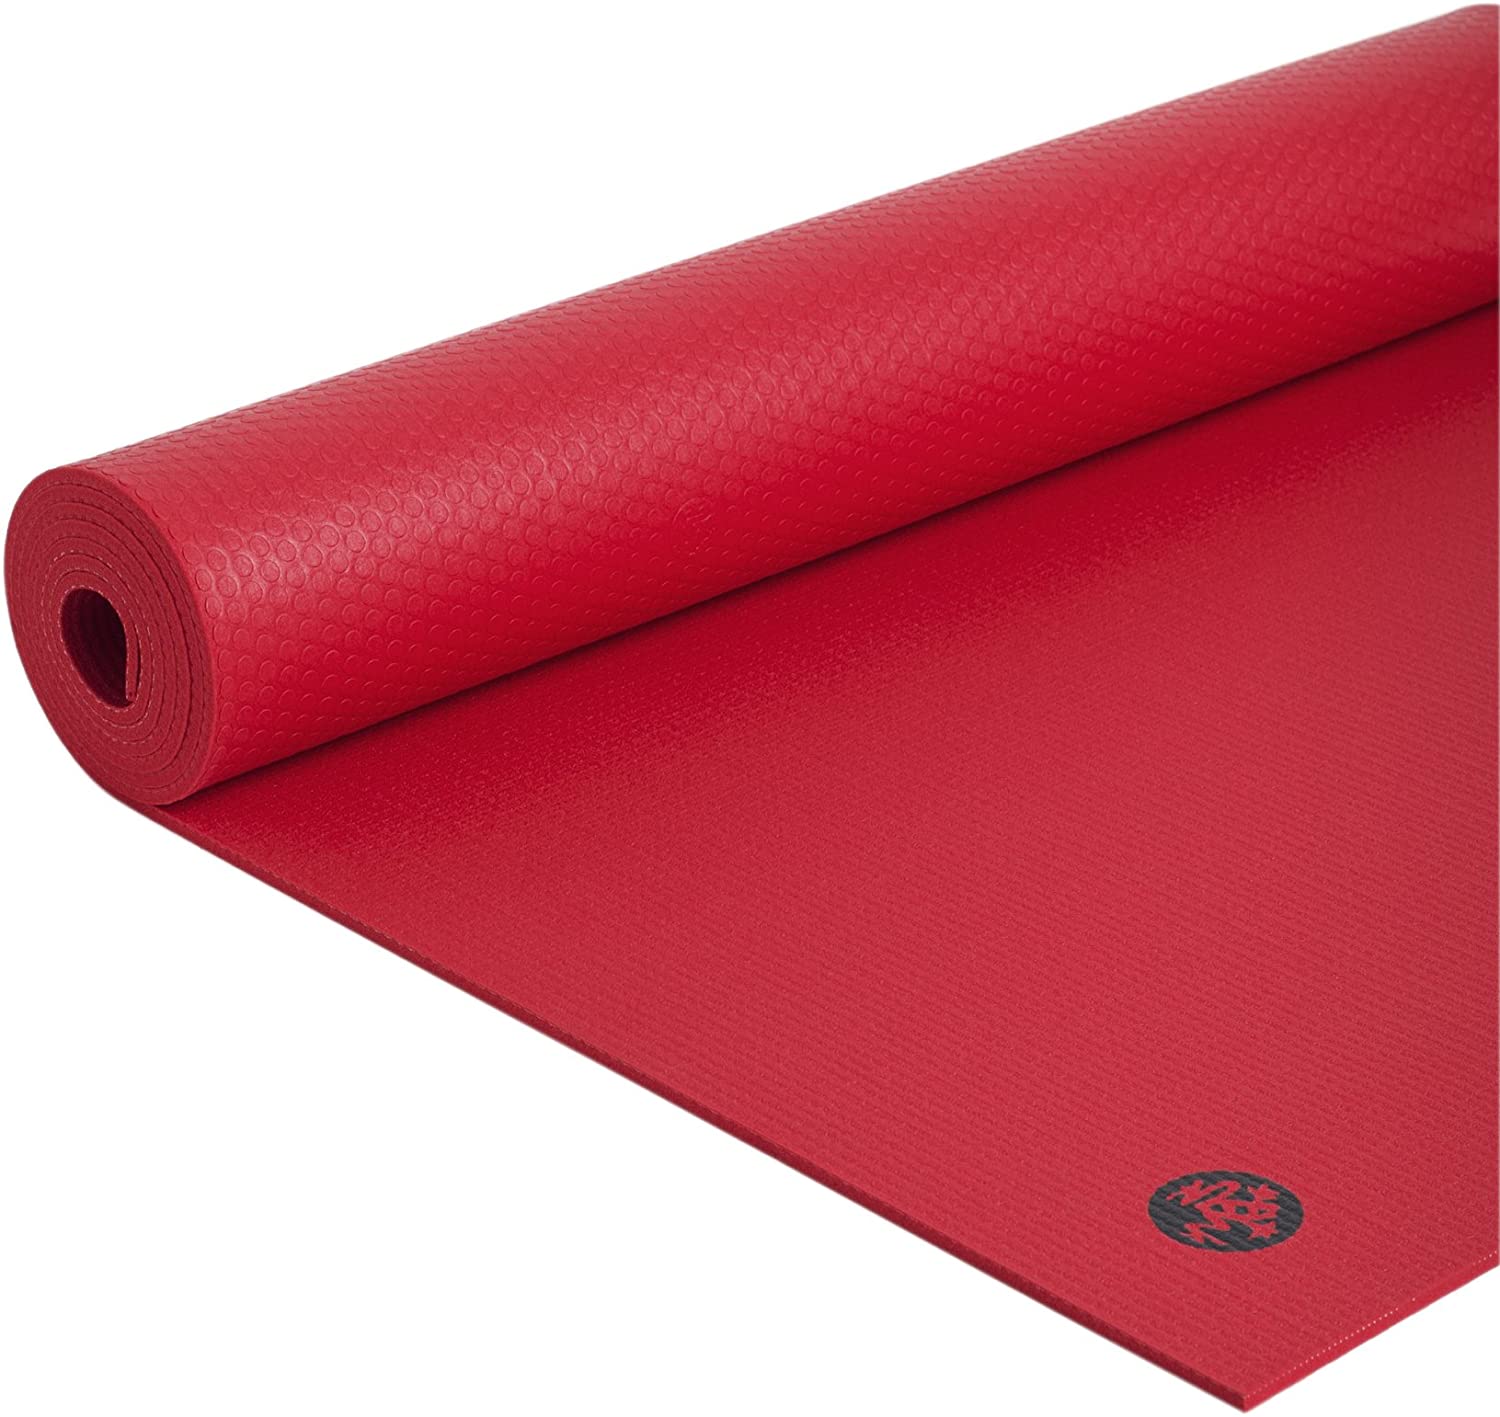 The Best Yoga Mats To Buy  International Society of Precision Agriculture